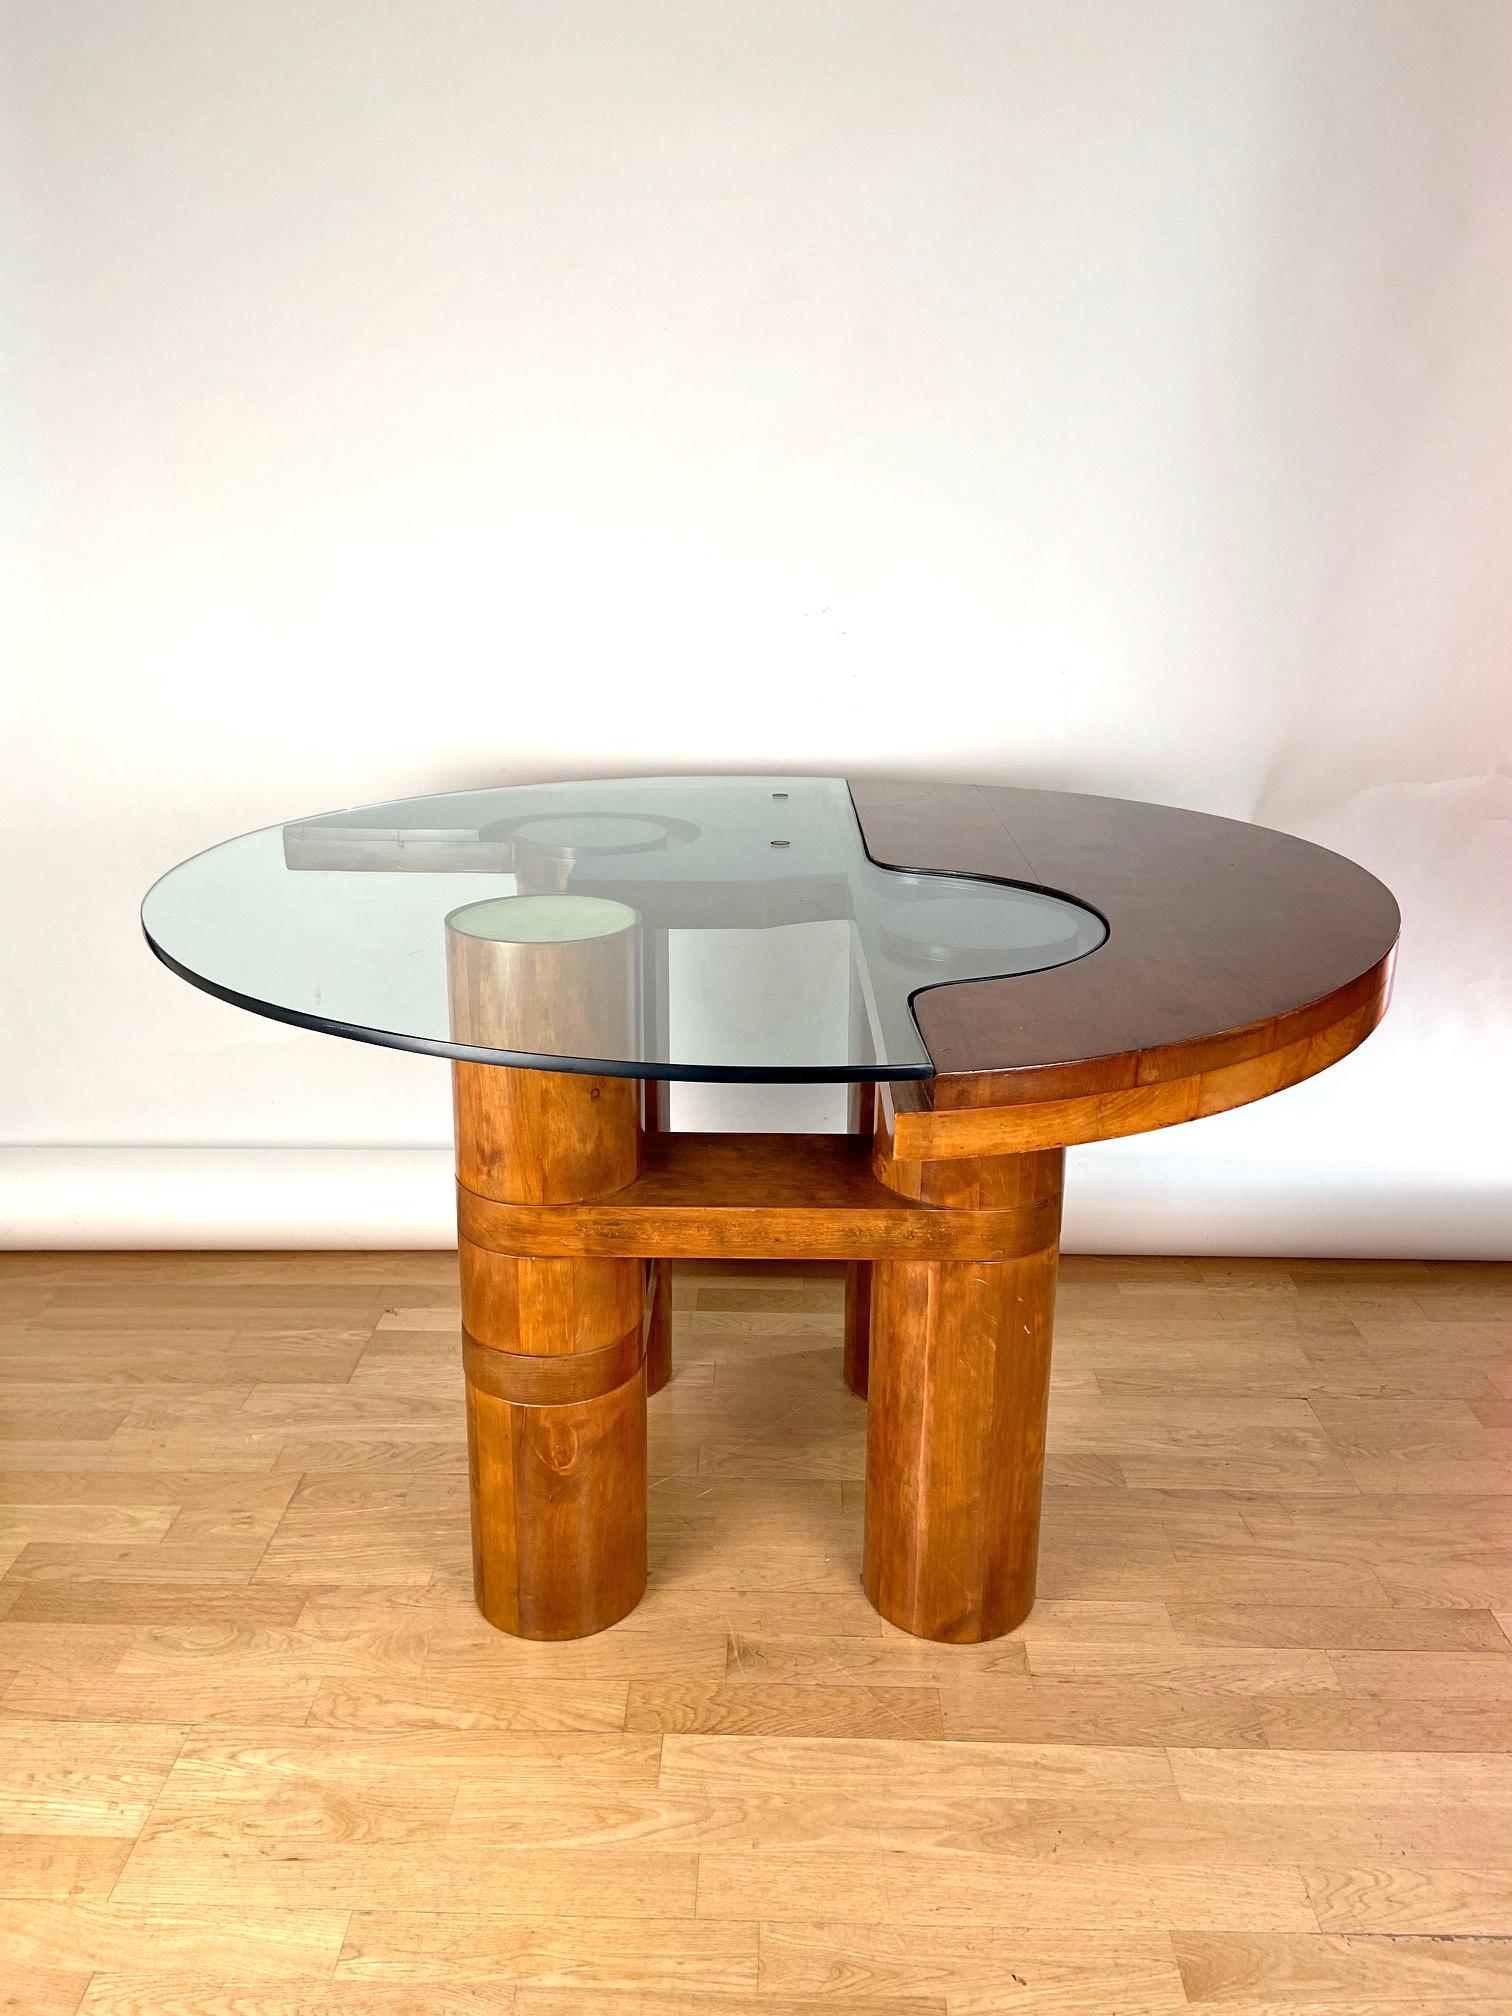 Late 20th Century Mid-Century Modern Center/Dining Walnut Table Attributed to N & Patuzzi NP Group